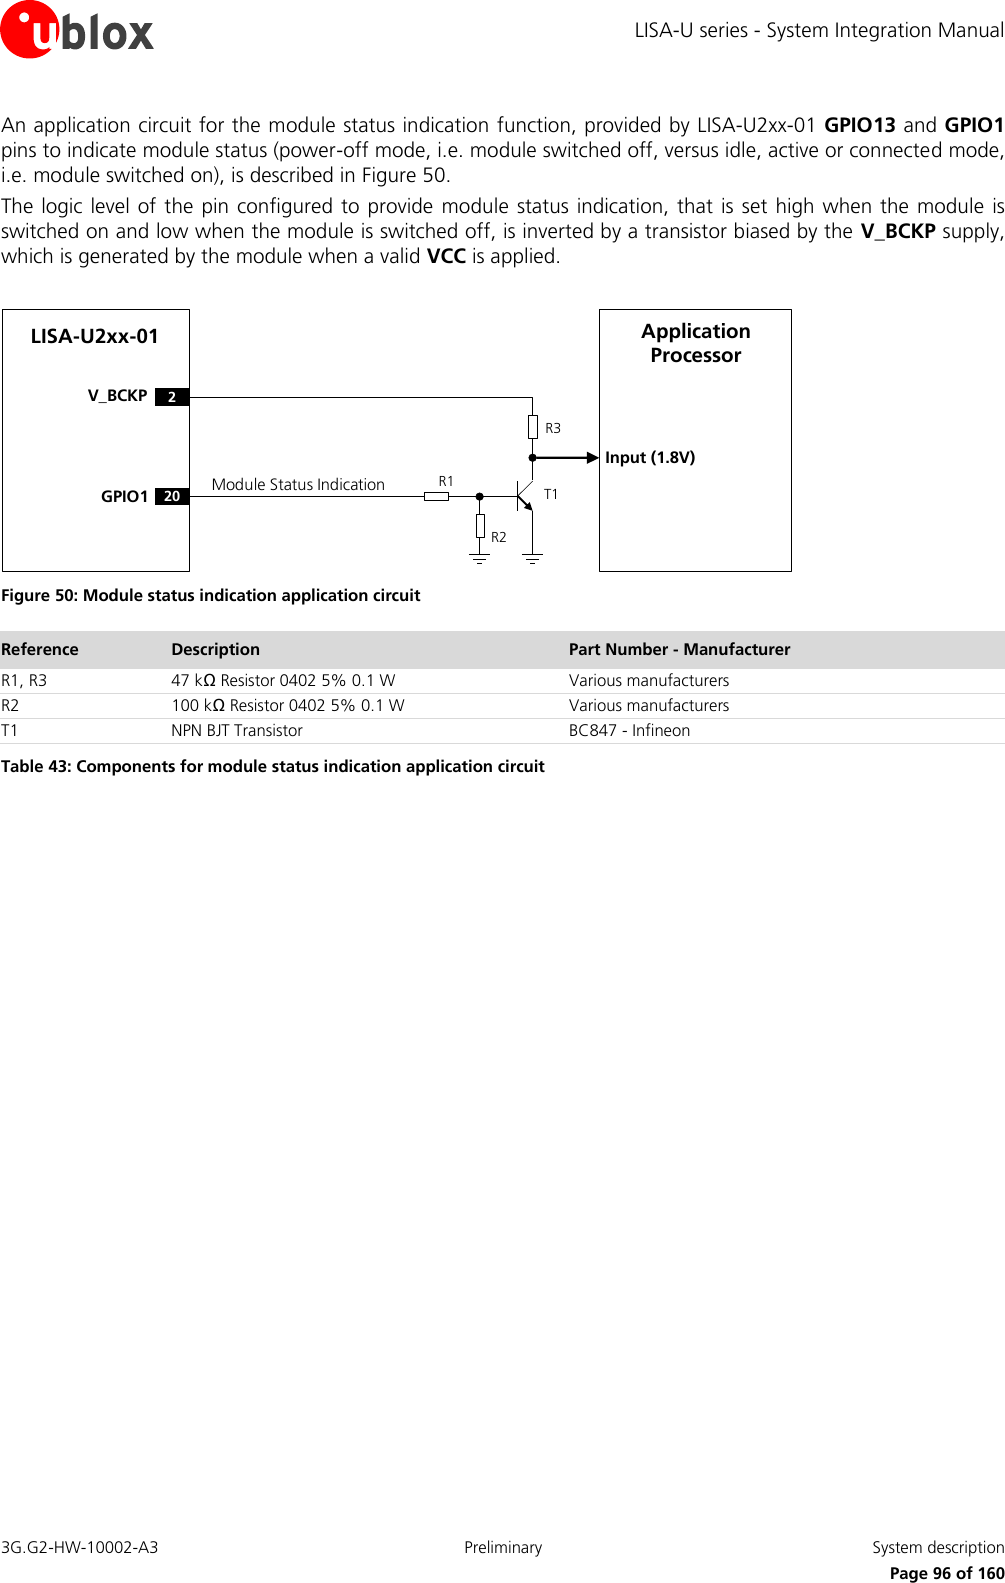 LISA-U series - System Integration Manual 3G.G2-HW-10002-A3  Preliminary  System description      Page 96 of 160 An application circuit for the module status indication function, provided by LISA-U2xx-01 GPIO13 and GPIO1 pins to indicate module status (power-off mode, i.e. module switched off, versus idle, active or connected mode, i.e. module switched on), is described in Figure 50. The logic level of the  pin  configured to provide  module status indication, that  is set high when the module is switched on and low when the module is switched off, is inverted by a transistor biased by the V_BCKP supply, which is generated by the module when a valid VCC is applied.  Input (1.8V)V_BCKP 2LISA-U2xx-01 Application ProcessorR1R3Module Status IndicationR220GPIO1 T1 Figure 50: Module status indication application circuit Reference Description Part Number - Manufacturer R1, R3 47 kΩ Resistor 0402 5% 0.1 W Various manufacturers R2 100 kΩ Resistor 0402 5% 0.1 W Various manufacturers T1 NPN BJT Transistor  BC847 - Infineon Table 43: Components for module status indication application circuit  